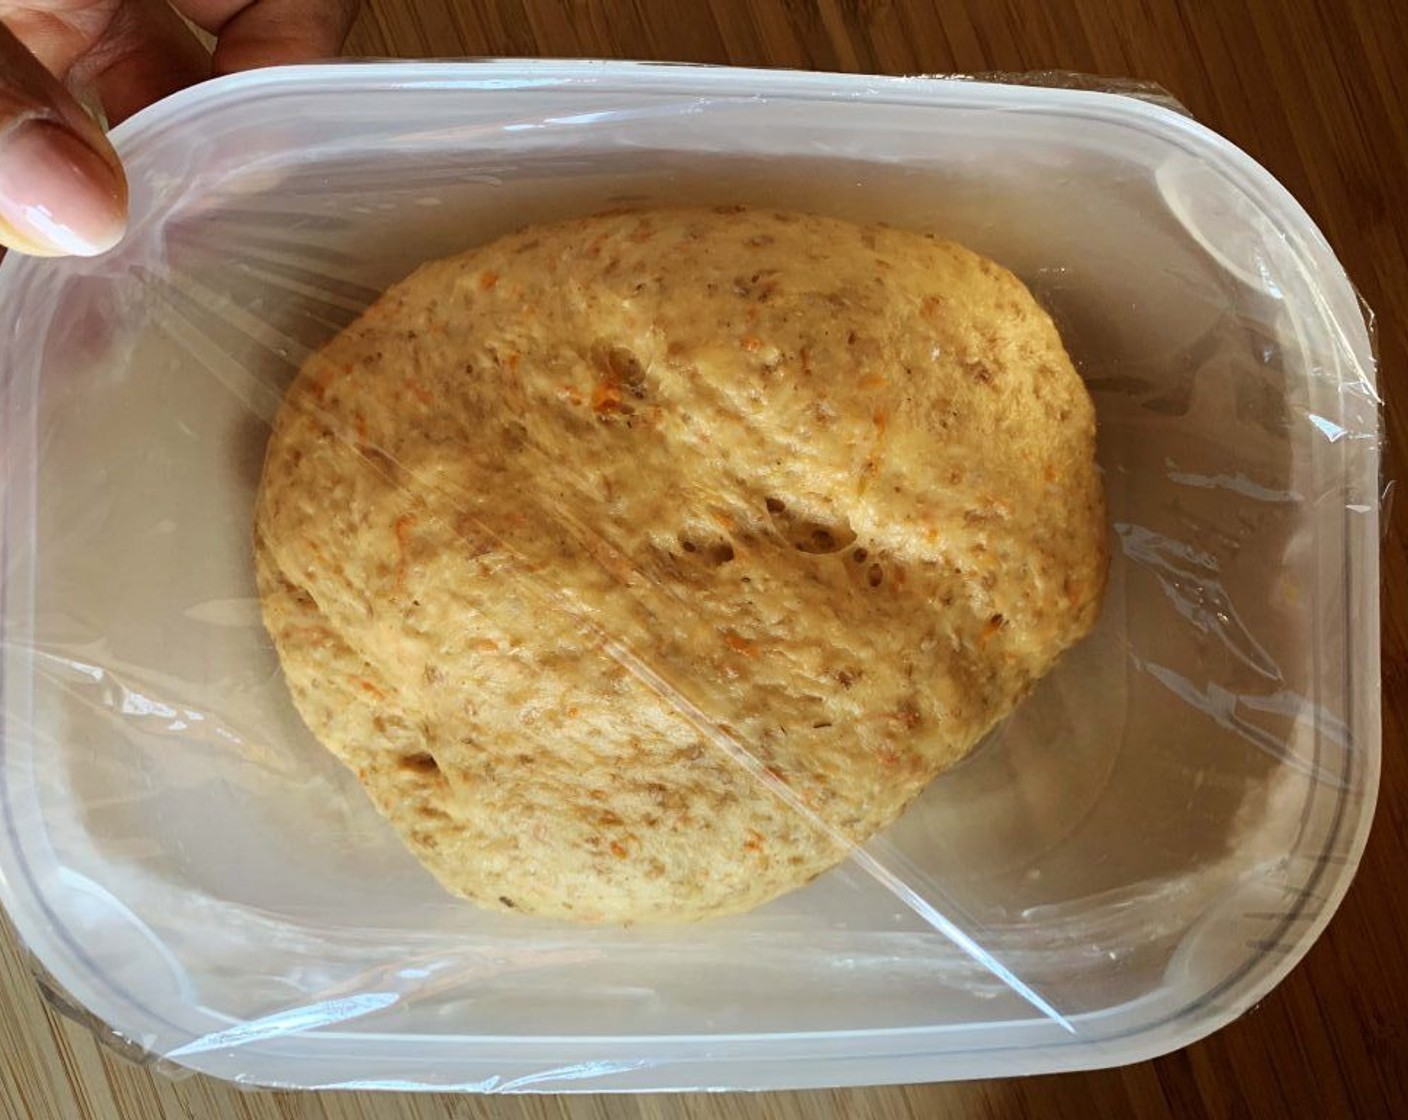 step 4 Place the dough into an oiled container, cover with plastic wrap and let it rest until it doubles in size (about 1.5-2 hours). Then place the dough in your fridge overnight.